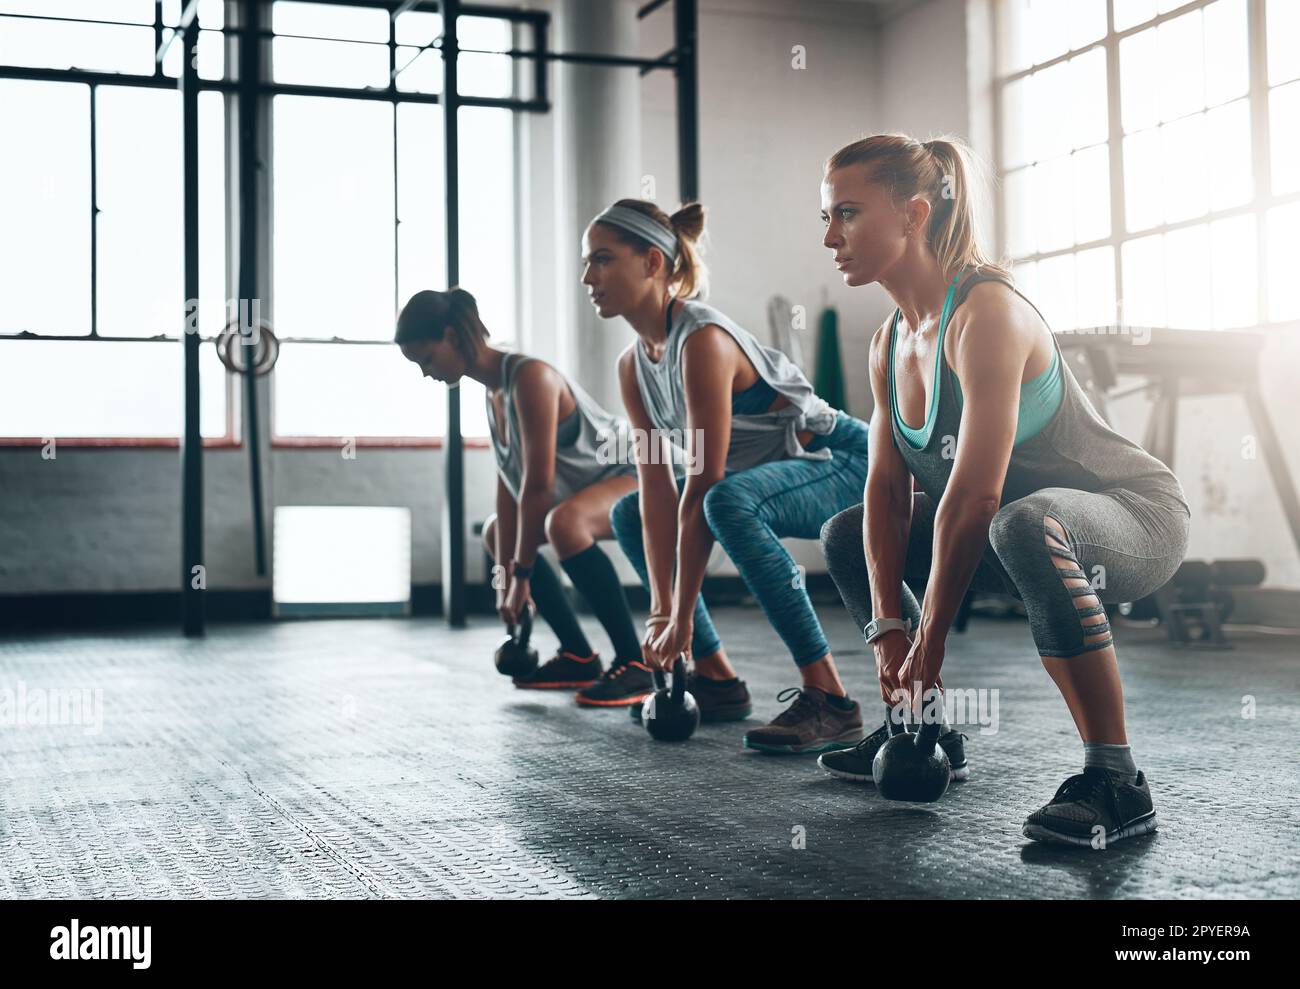 You are stronger than your challenges. three young women working out together. Stock Photo